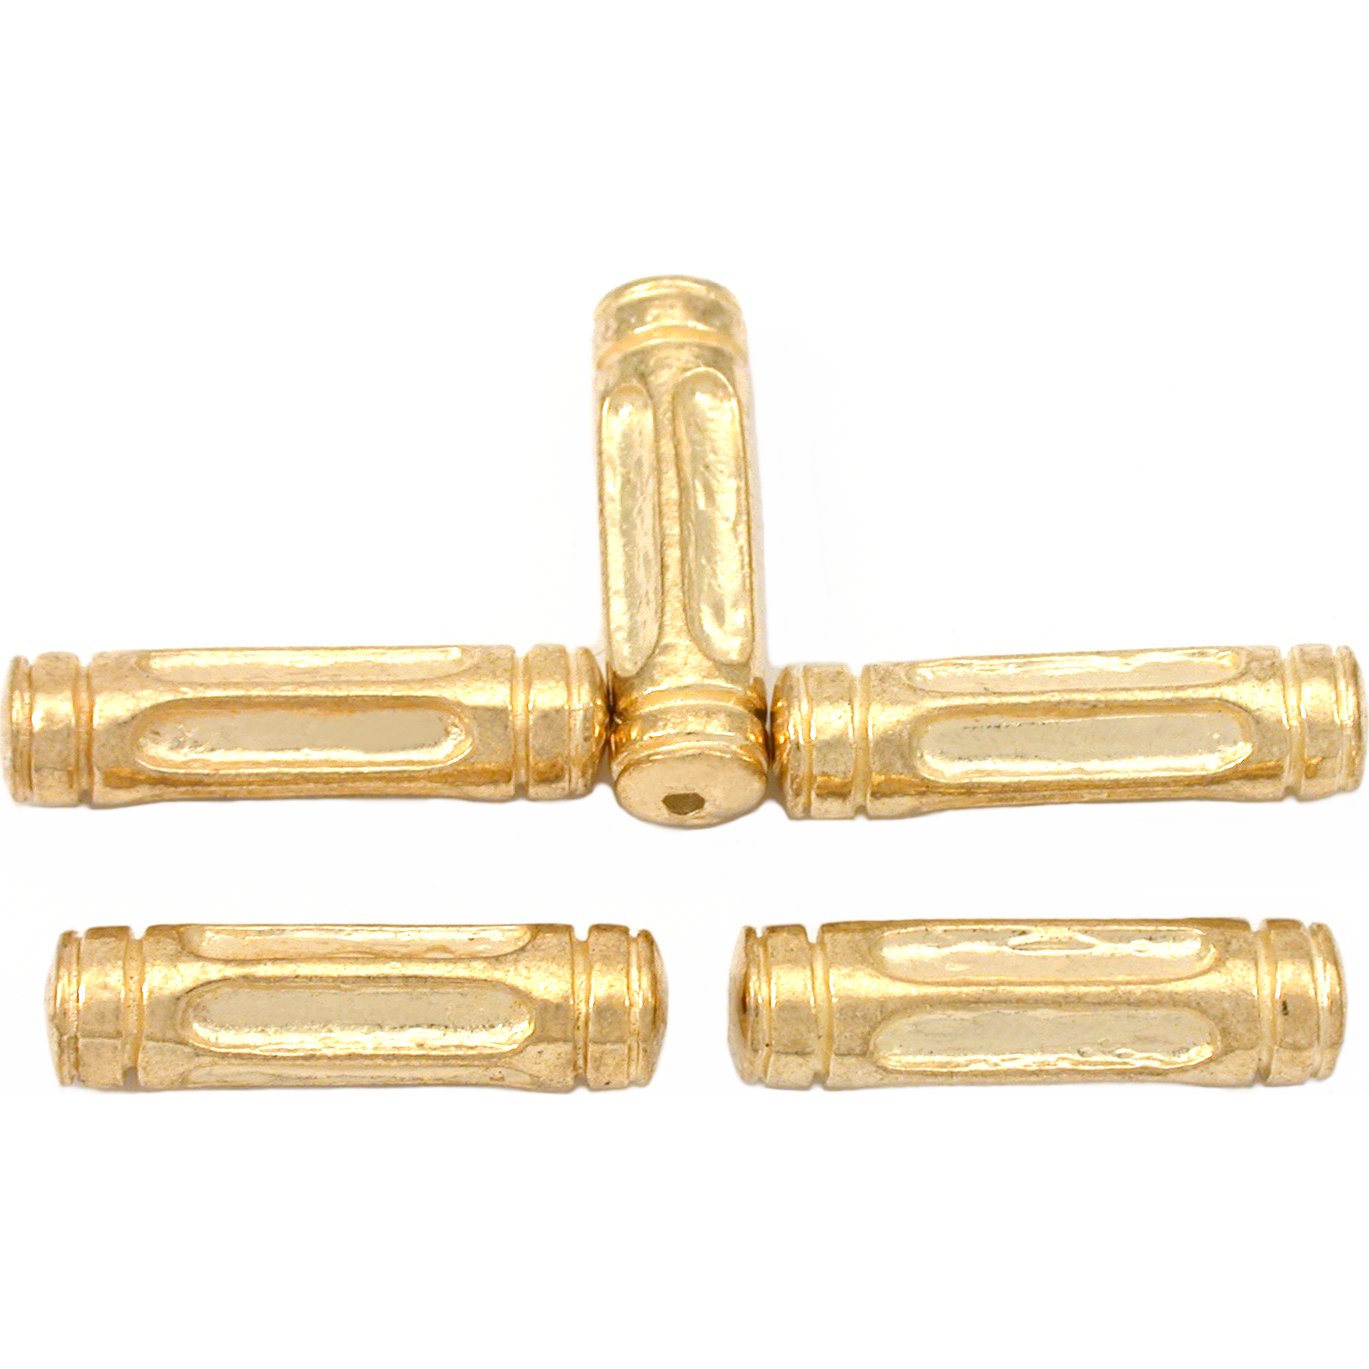 Bali Tube Gold Plated Beads 23mm 17 Grams 5Pcs Approx.